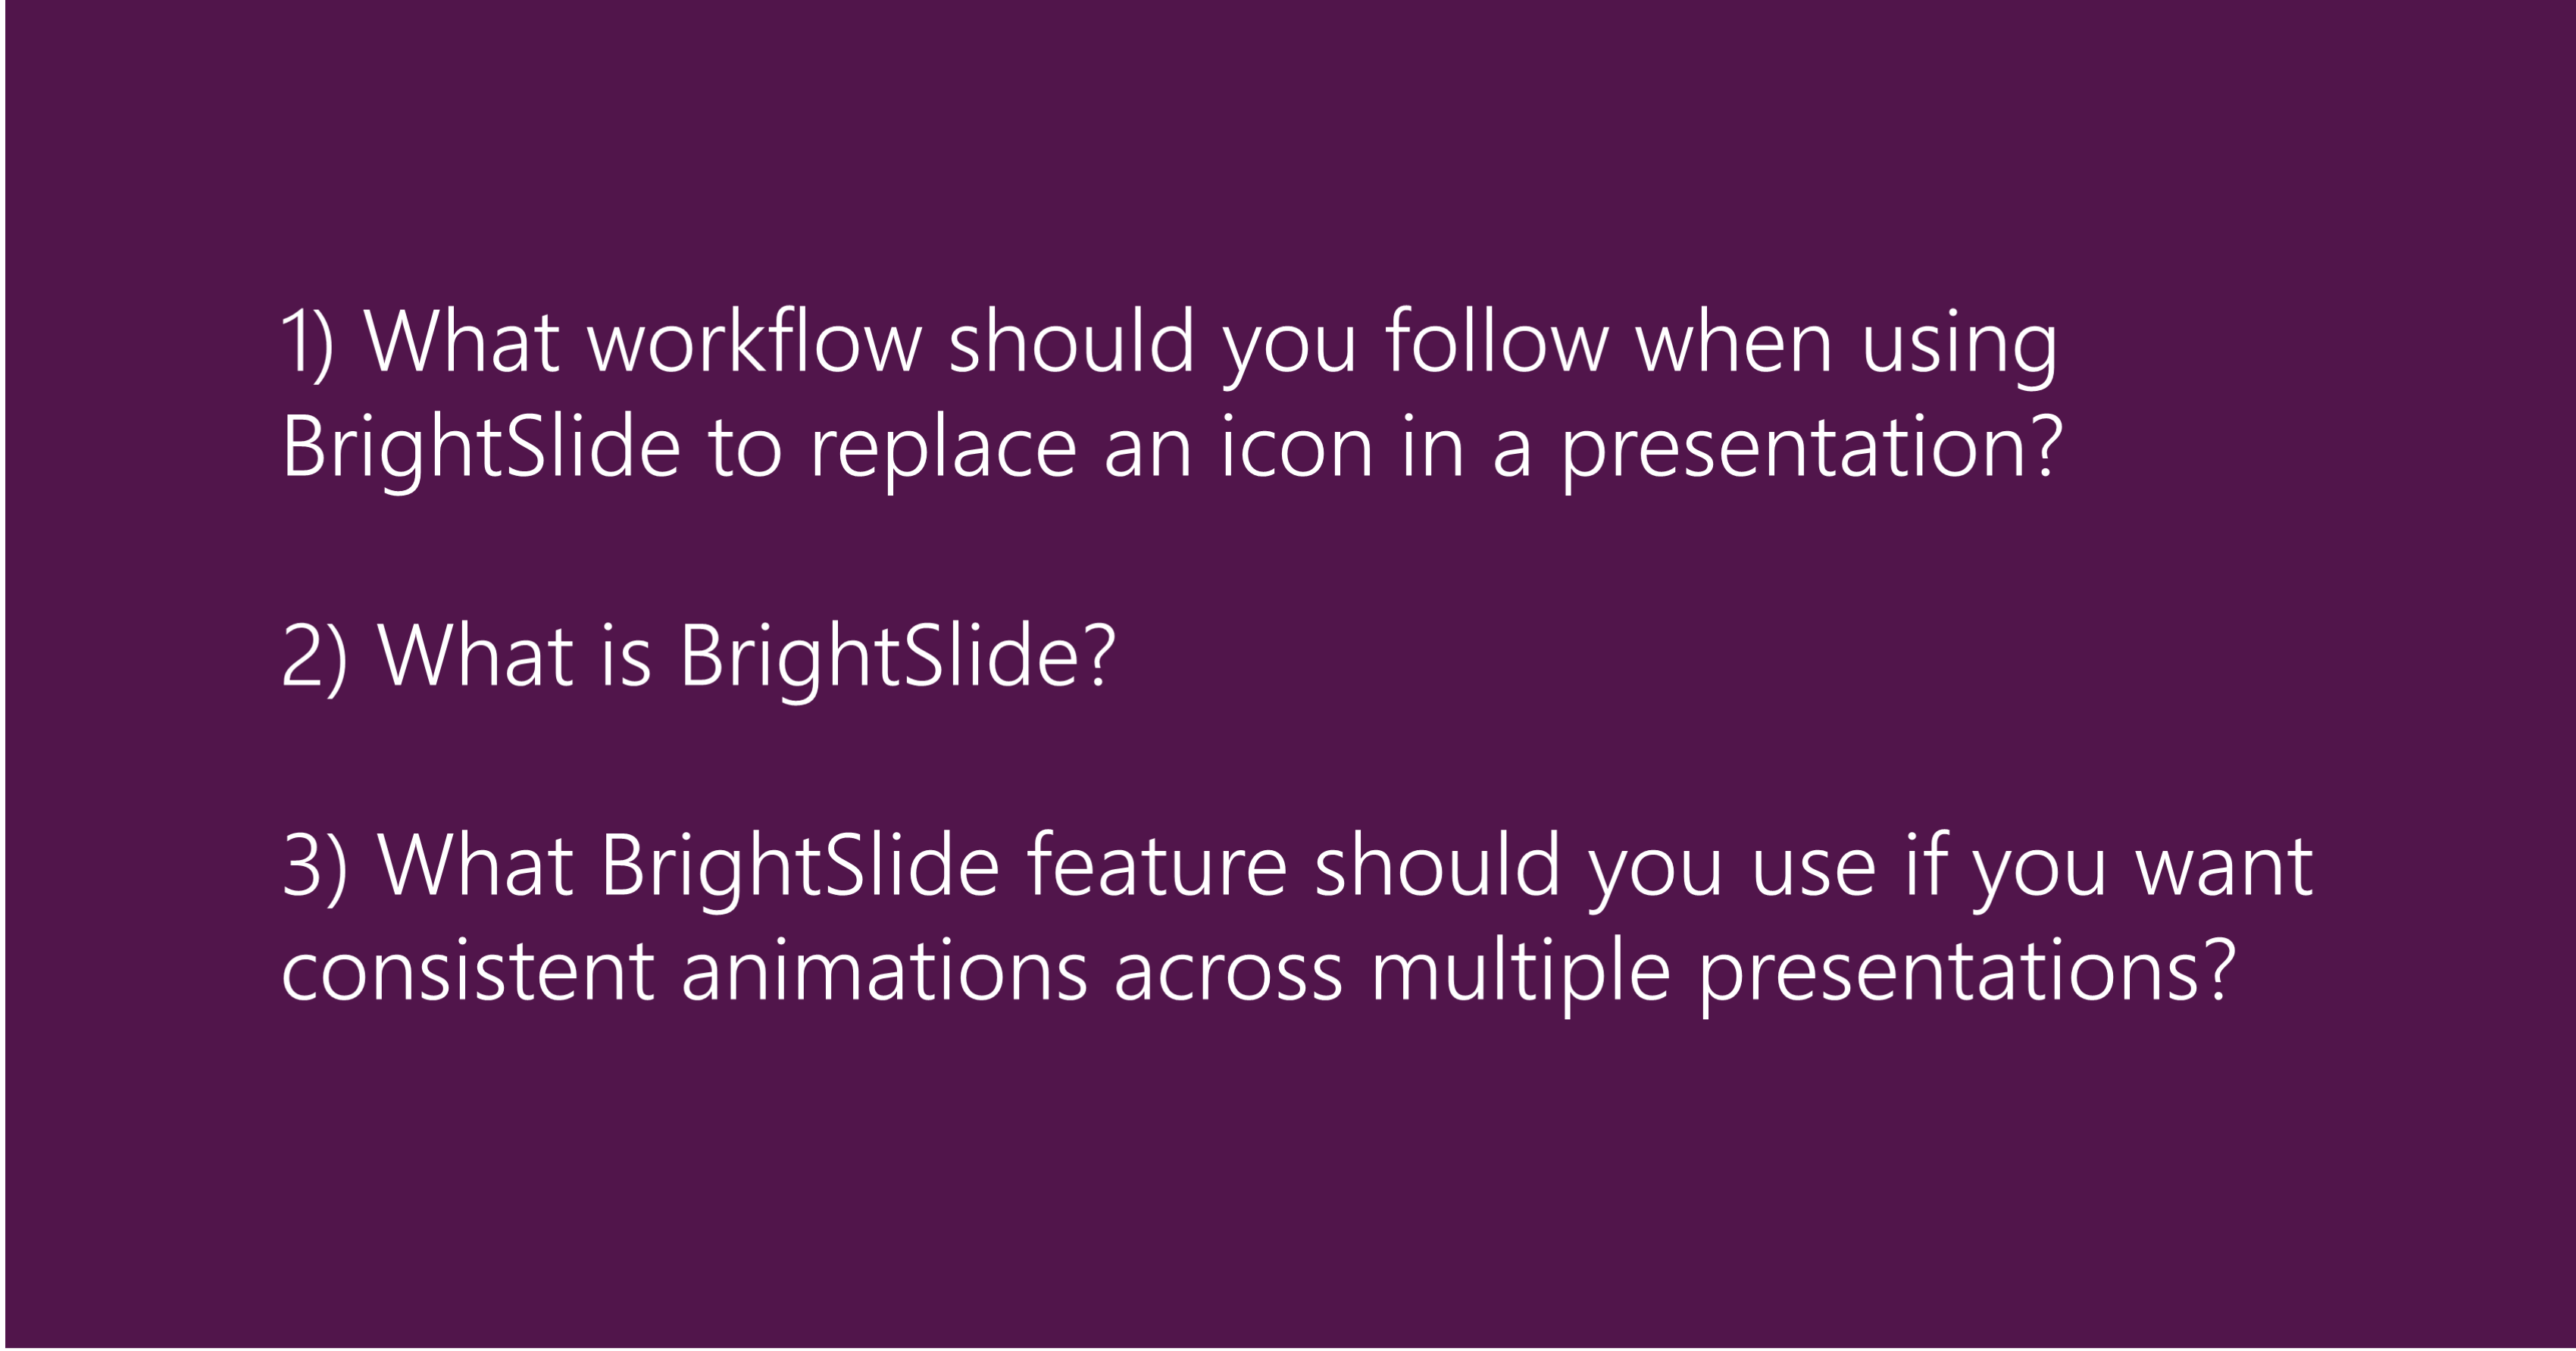 1) What workflow should you follow when using BrightSlide to replace an icon in a presentation? 2) What is BrightSlide? 3) What BrightSlide feature should you use if you want consistent animations across multiple presentations?